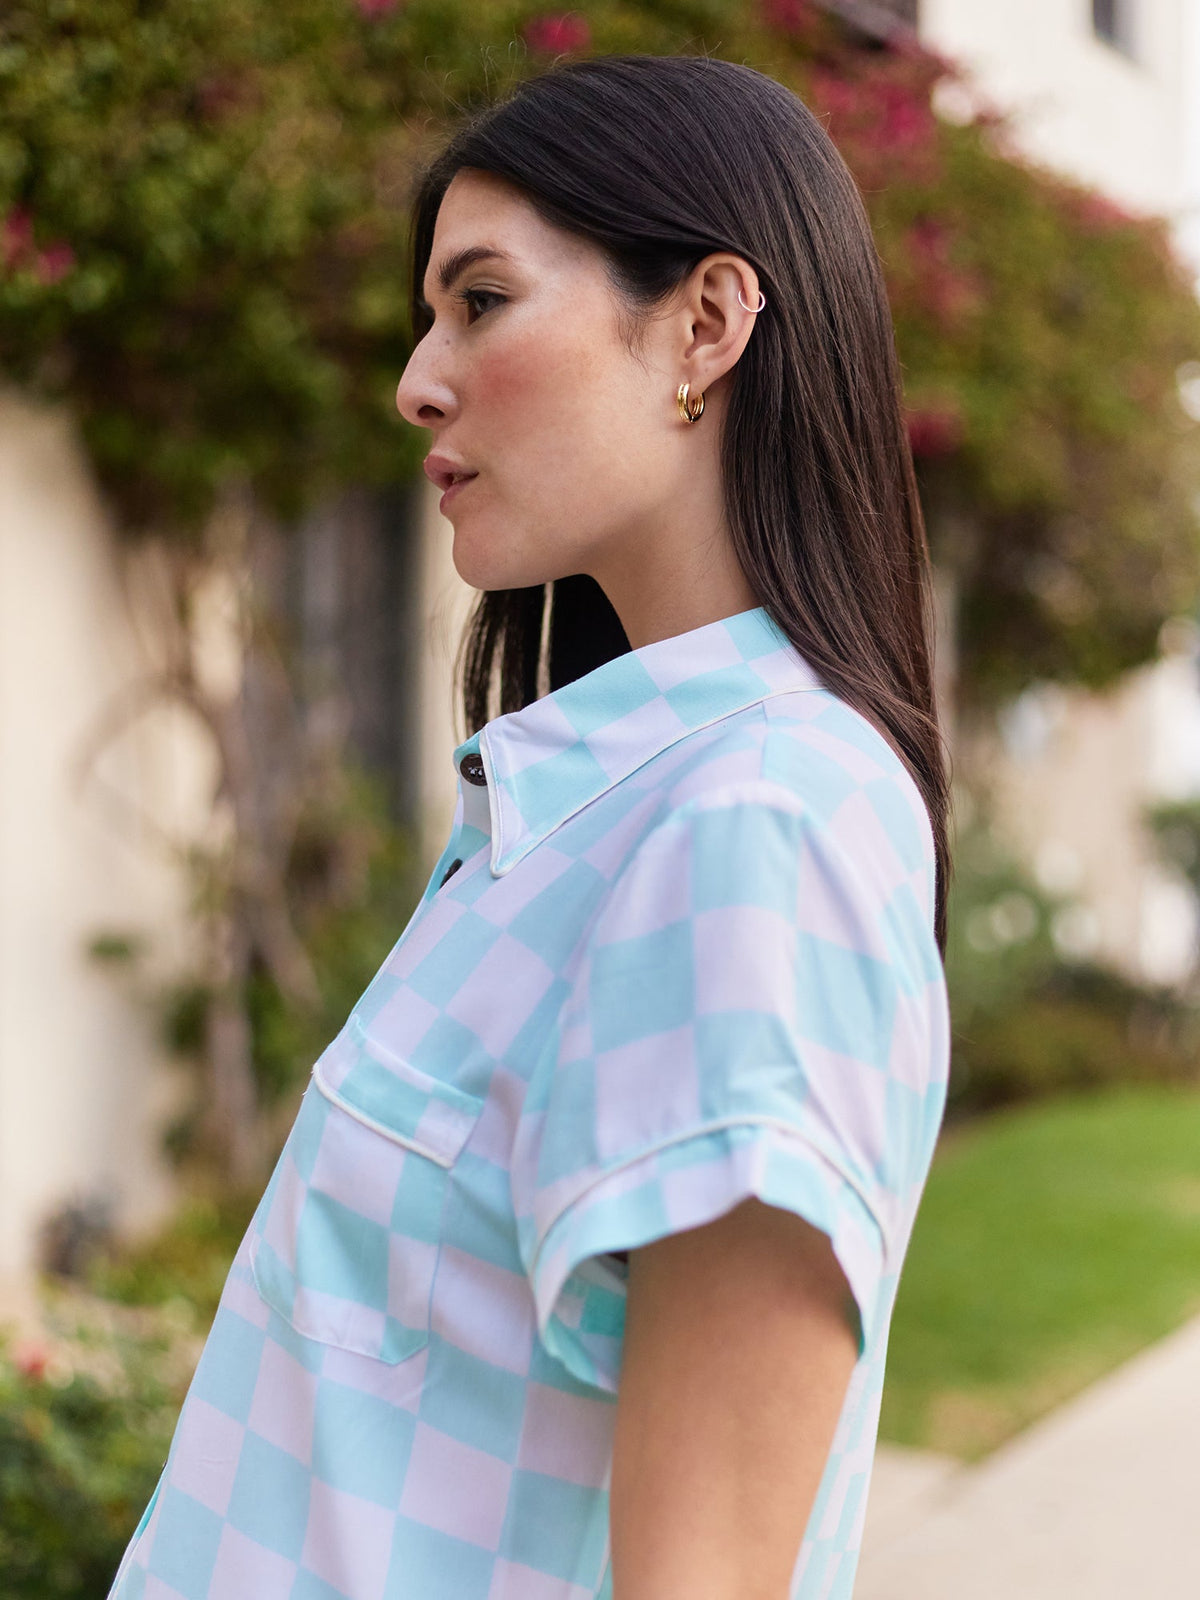 Image of a woman&#39;s profile while she stands on a sidewalk wearing a teal and white checkered checkered shirt.